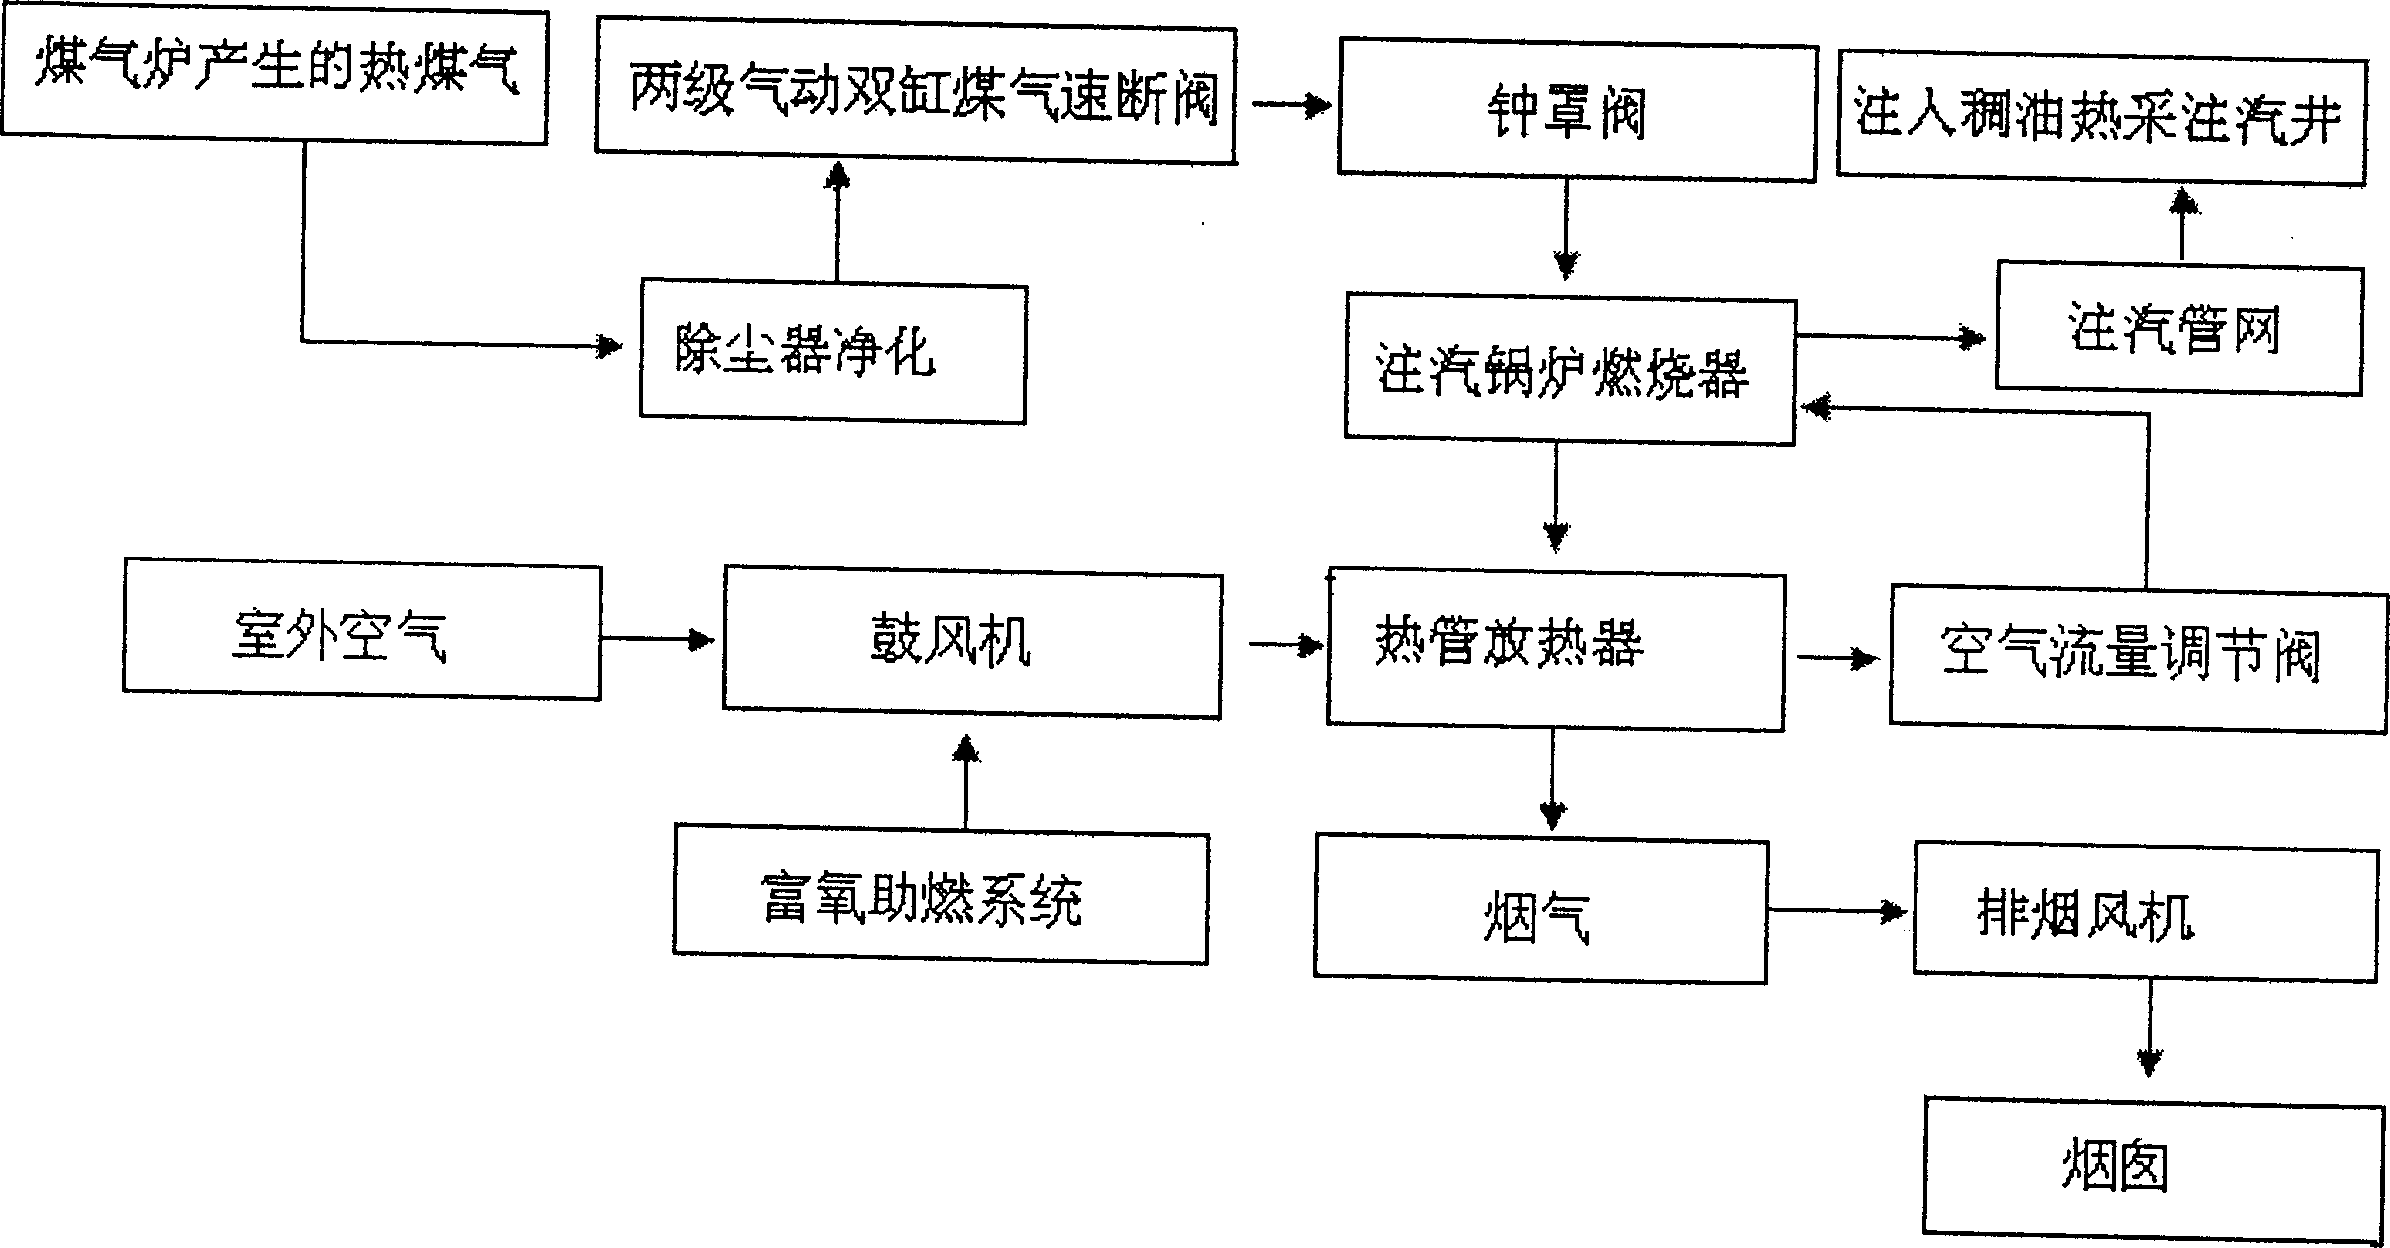 Process for using hot coal gas as viscous crude thermal recovery and gas injection boiler fuel